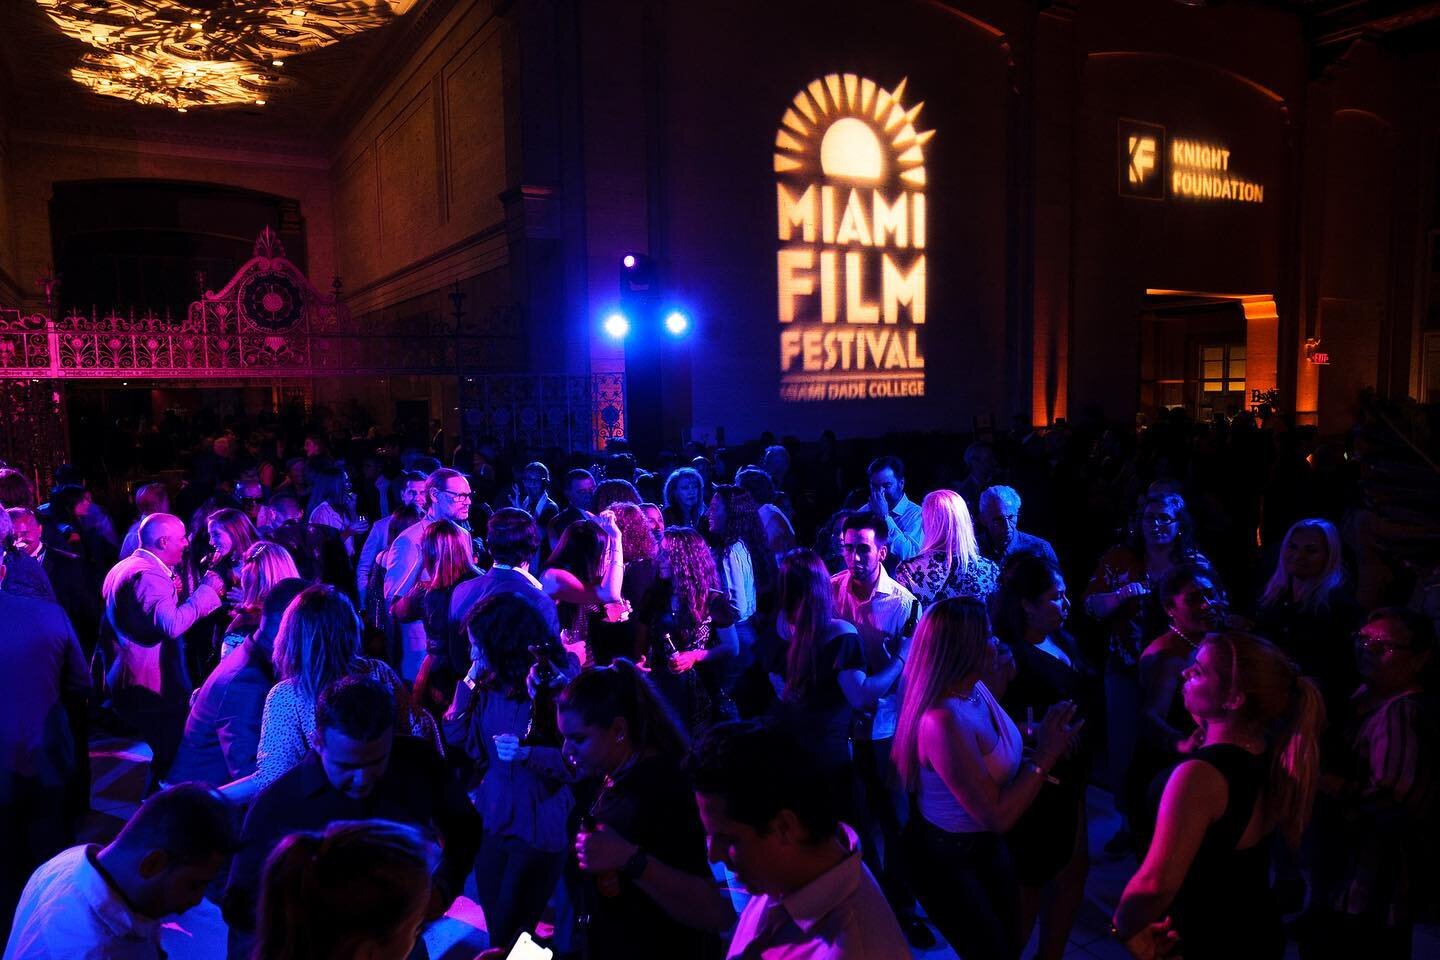 Opening night for the @miamifilm was one for the books! Special shout out to @fikaevents for putting together such a great party, cant wait to see what they have in store for closing night!